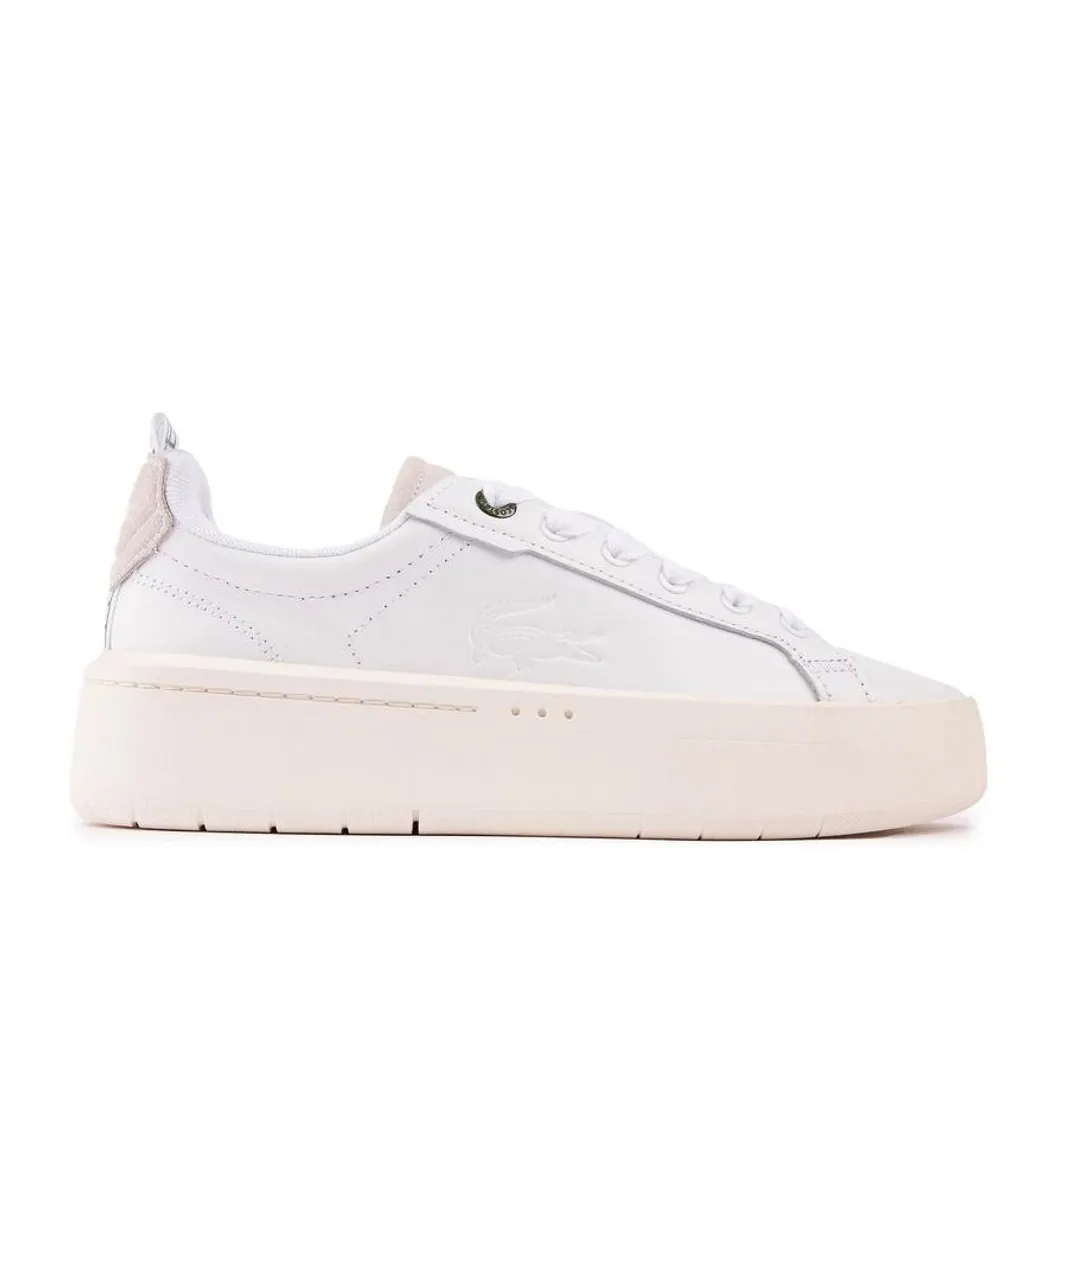 Lacoste Womens Carnaby Platform Trainers - White